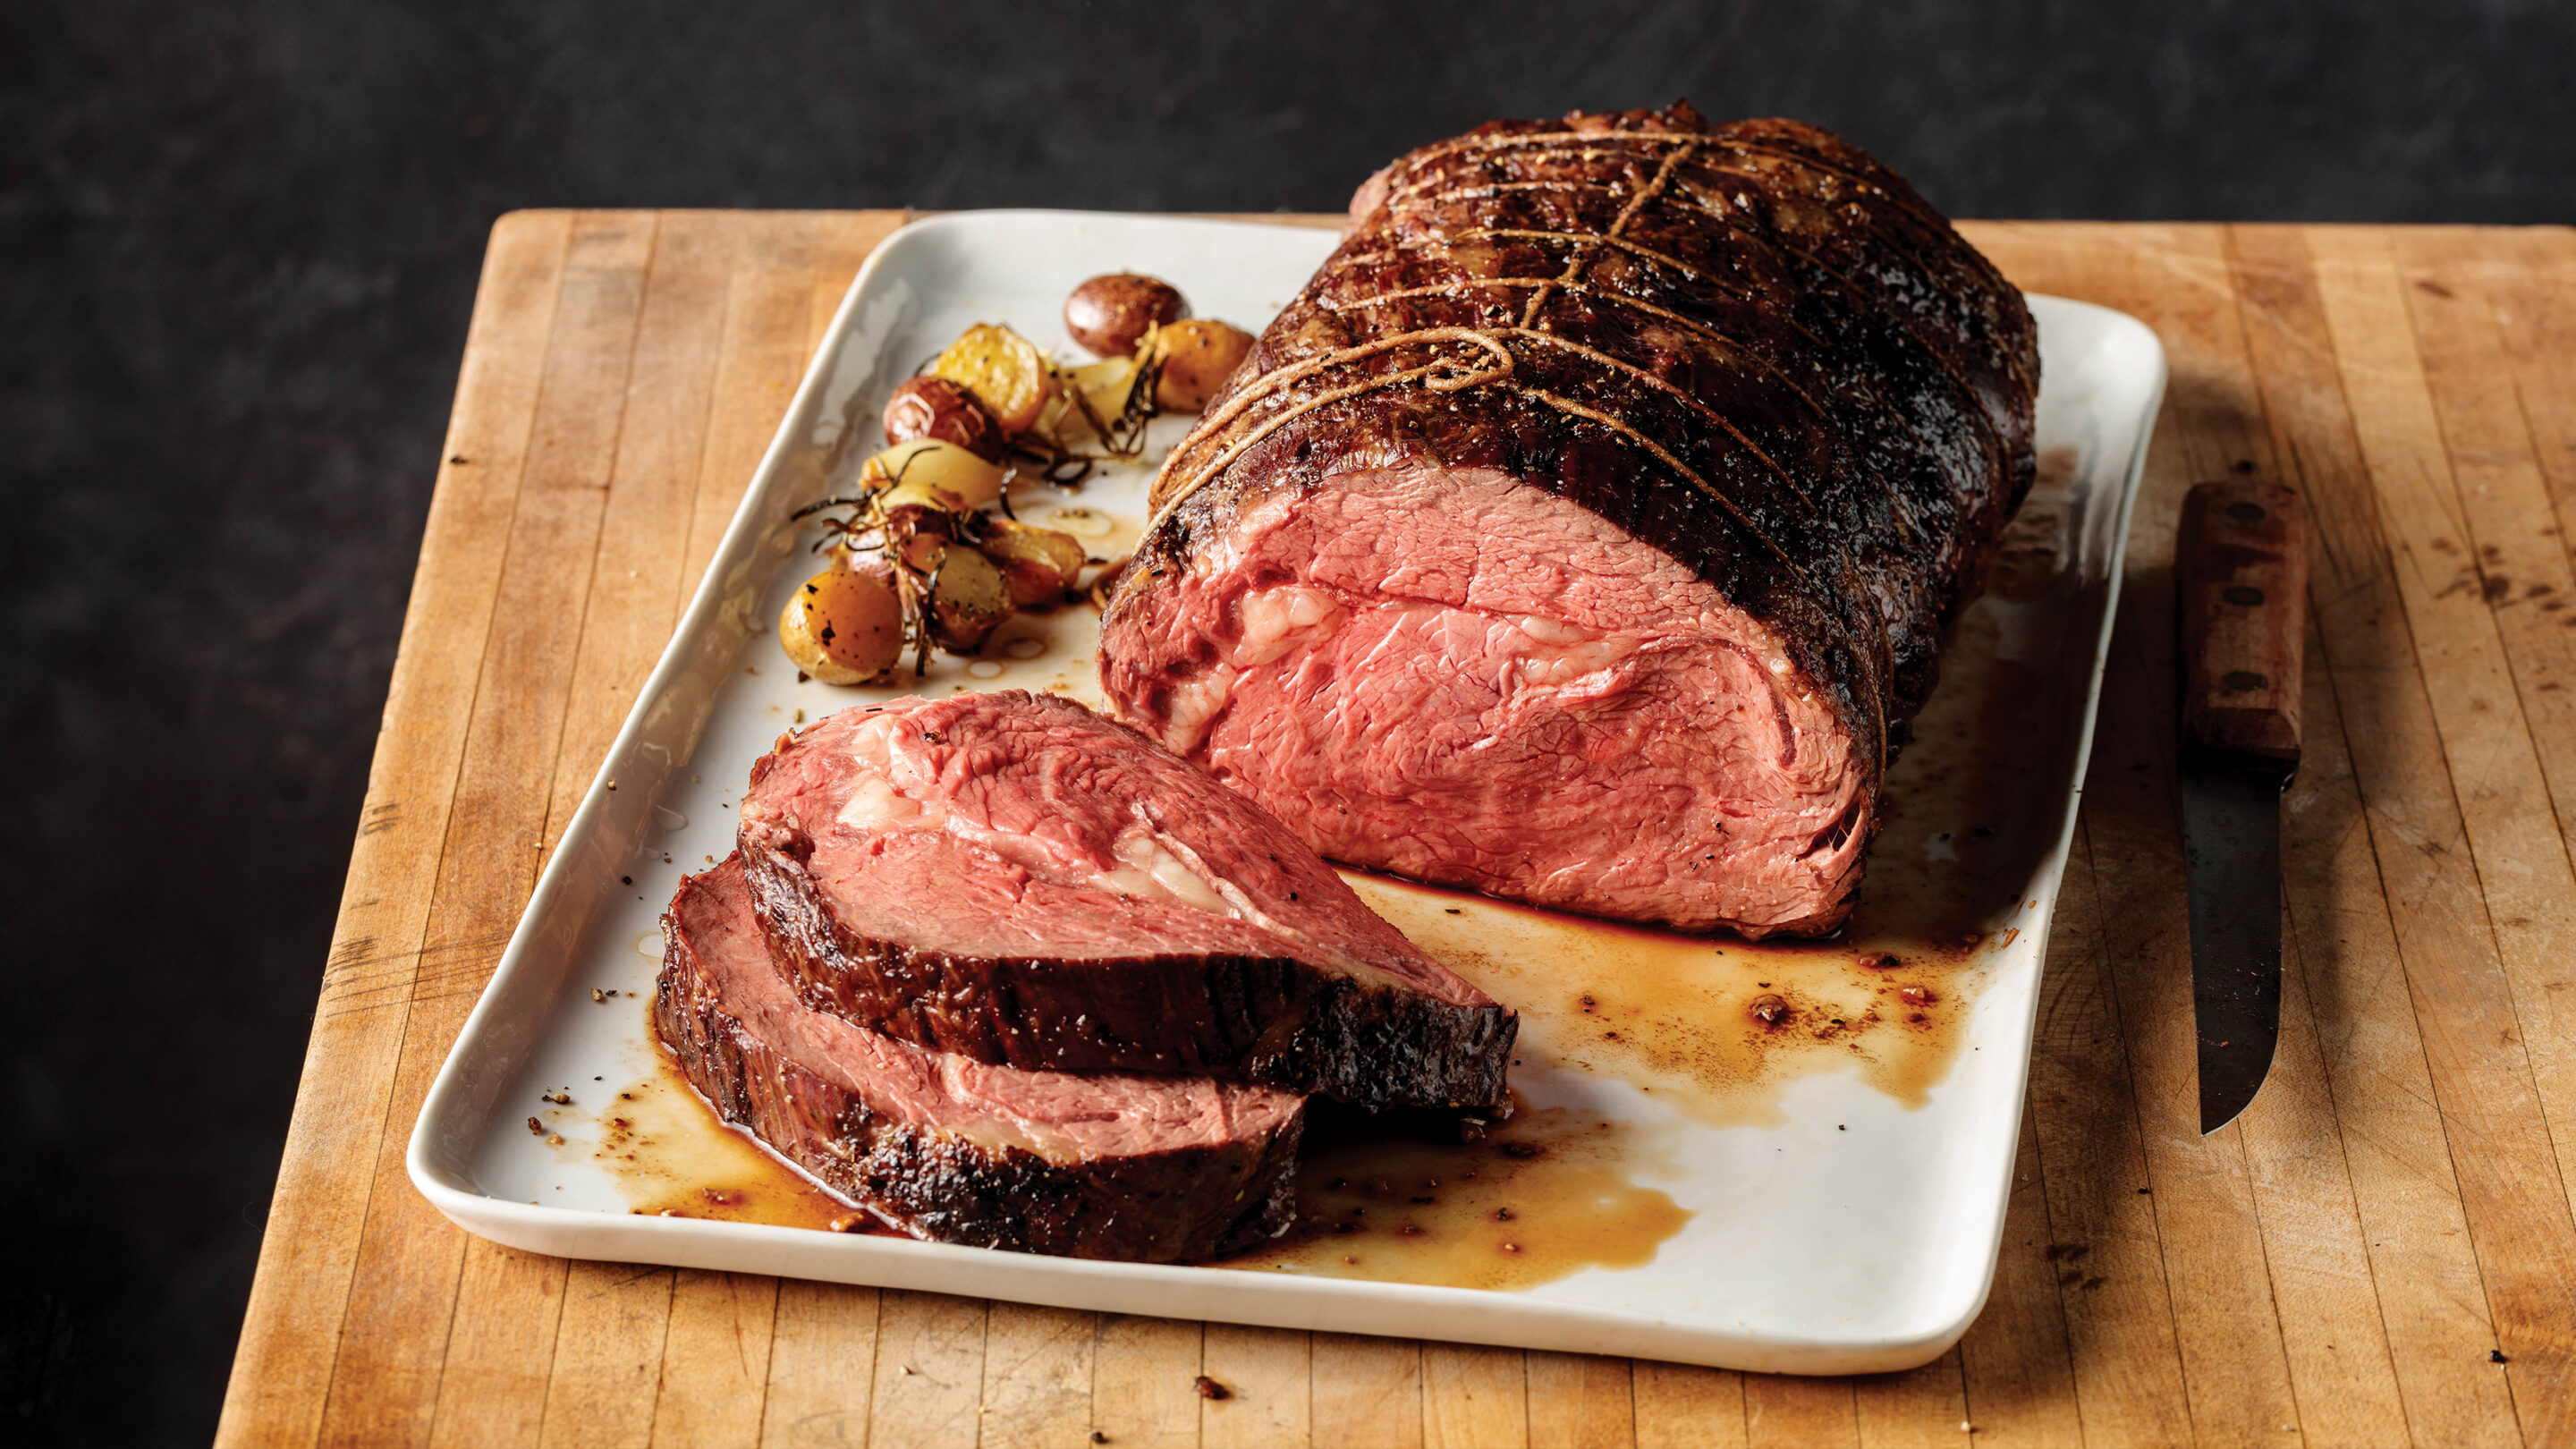 https://blog-content.omahasteaks.com/wp-content/uploads/2022/06/blogwp_how-to-cook-the-perfect-holiday-roast-scaled-1.jpg